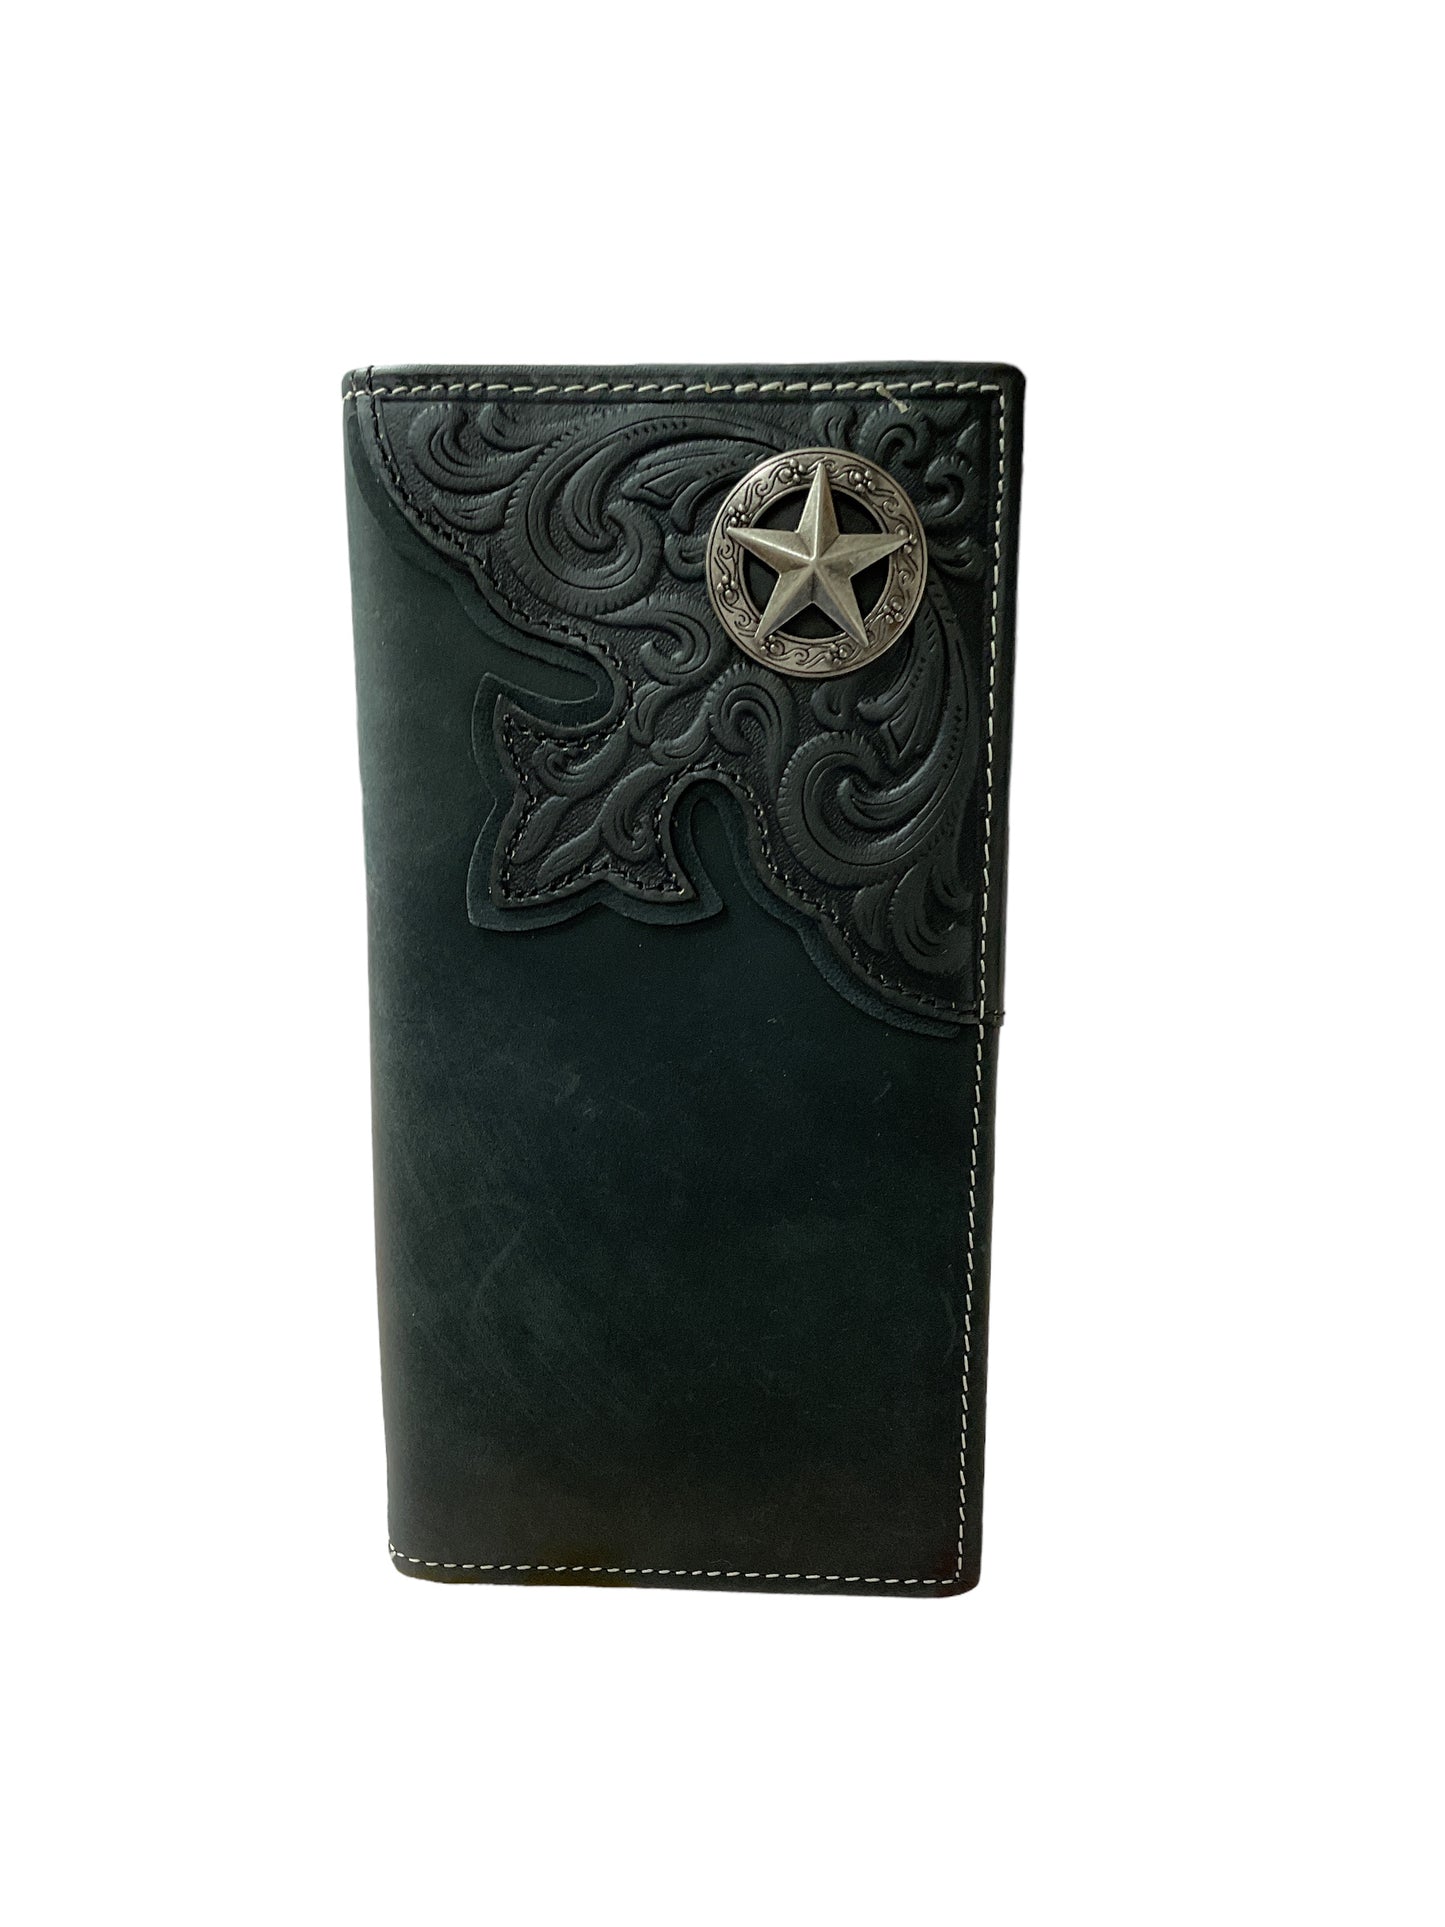 Montana West Genuine Tooled Leather Collection Men's Wallet